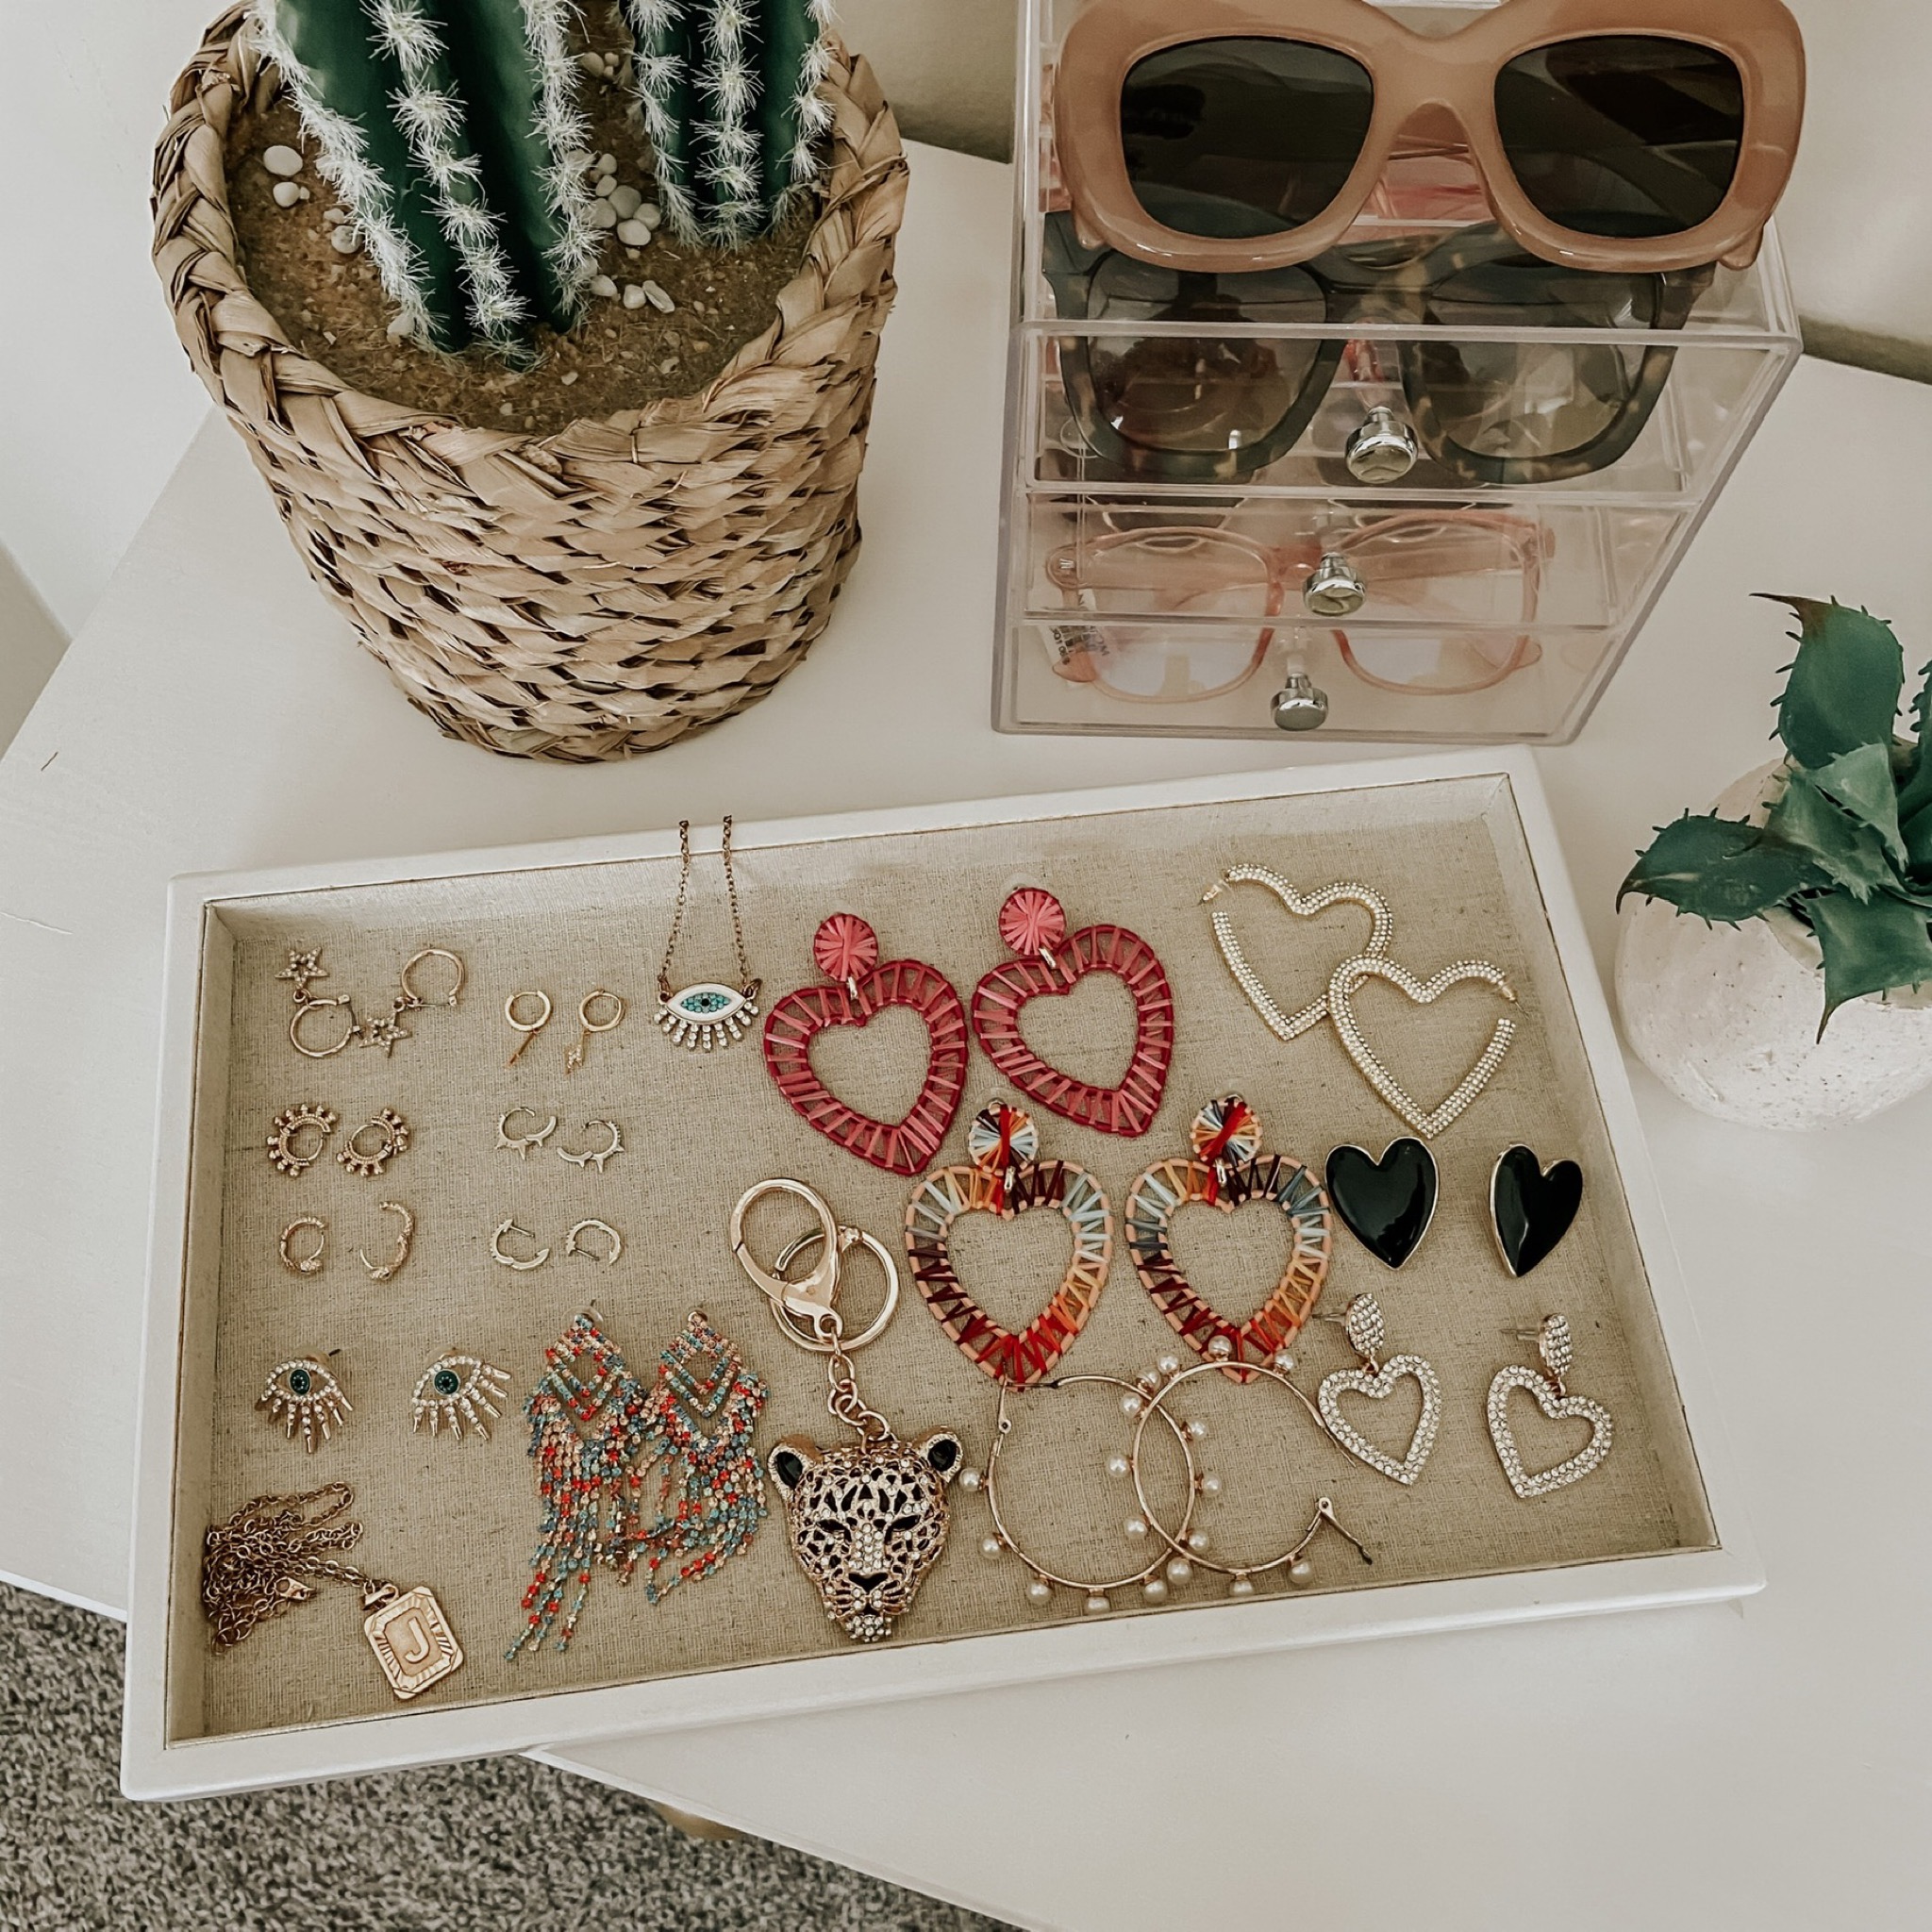 AMAZON ROUNDUP JANUARY 2020- Jaclyn De Leon Style- Sharing all my Amazon Prime favorites from the month of January from cozy sweaters, valentines items + tons of cute accessories